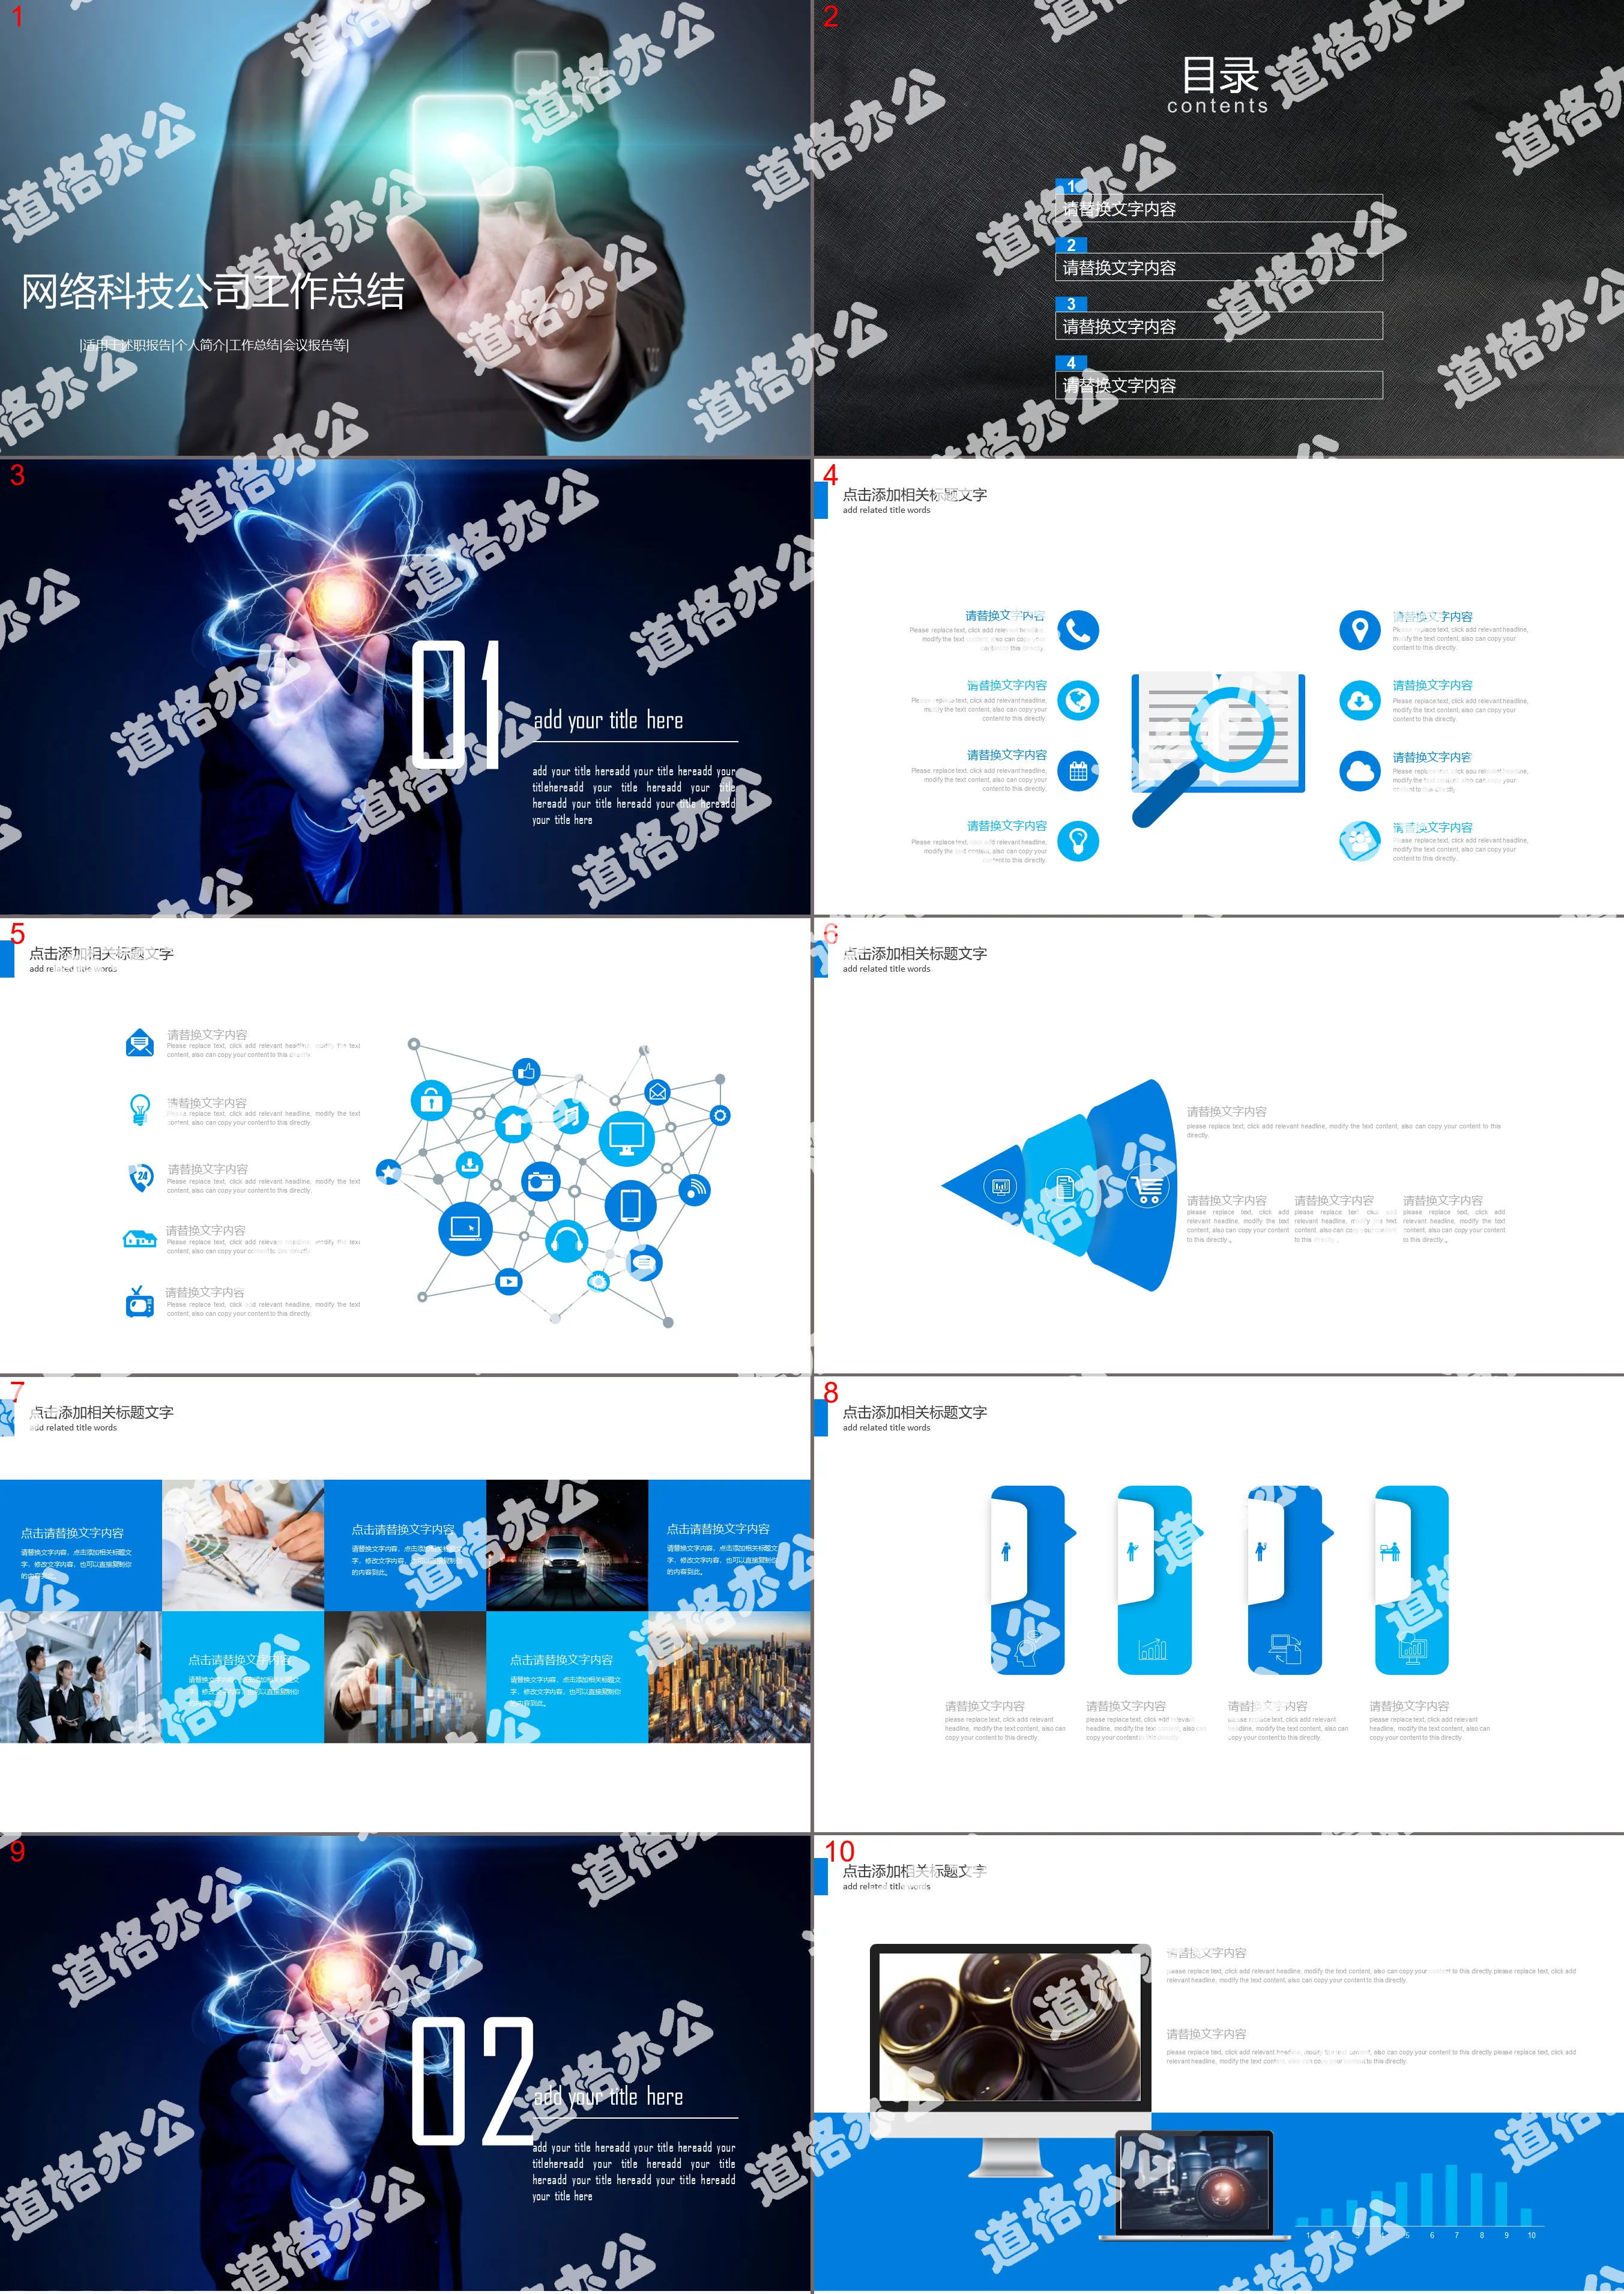 Blue network technology company year-end work summary PPT template